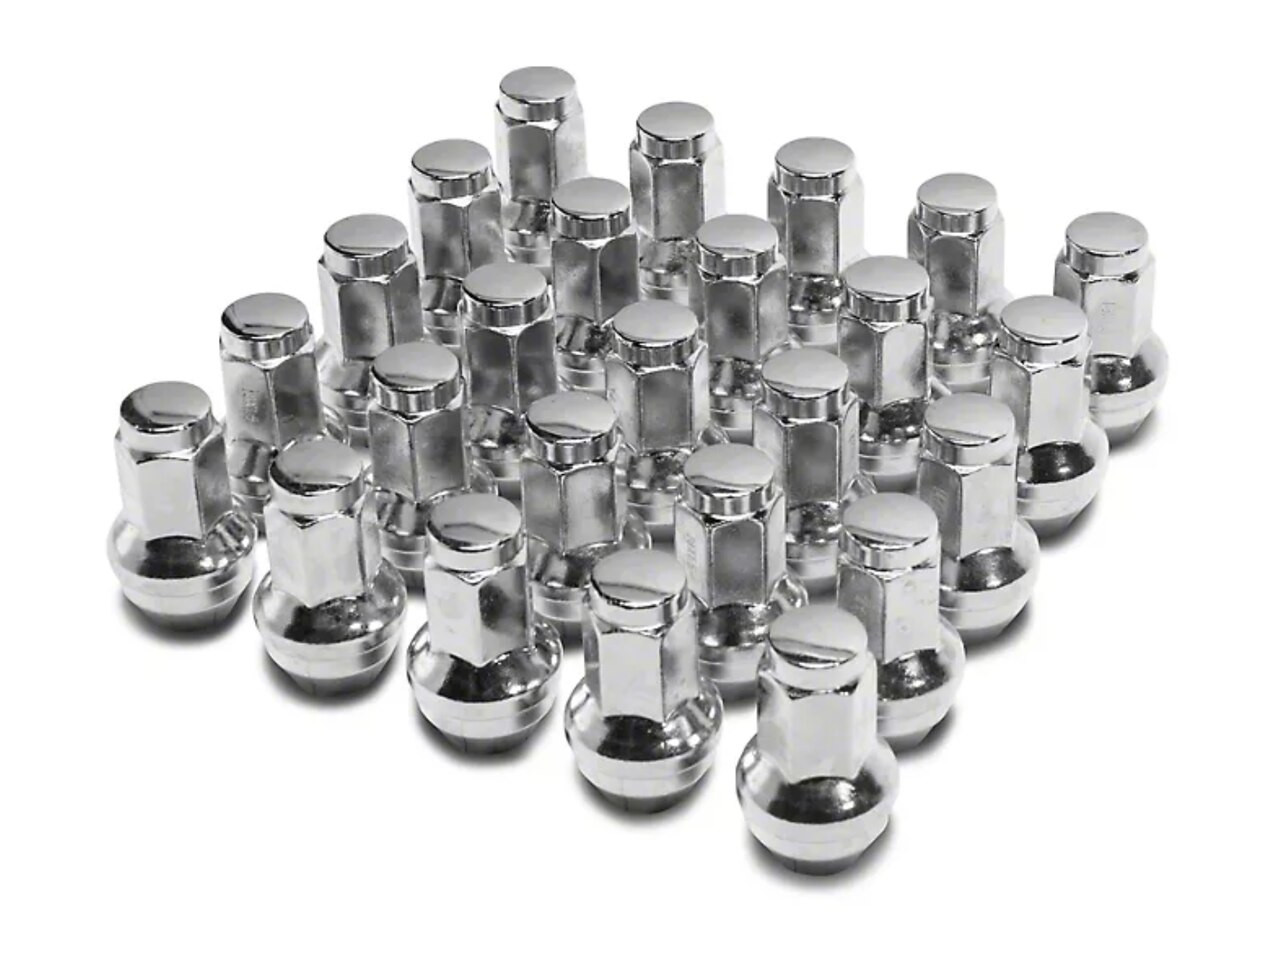 24 Pieces Stock Factory OEM Style Lug Nuts- Install Kit - Ford (13/16 Hex) M14x1.5 (6 Lug Kit)